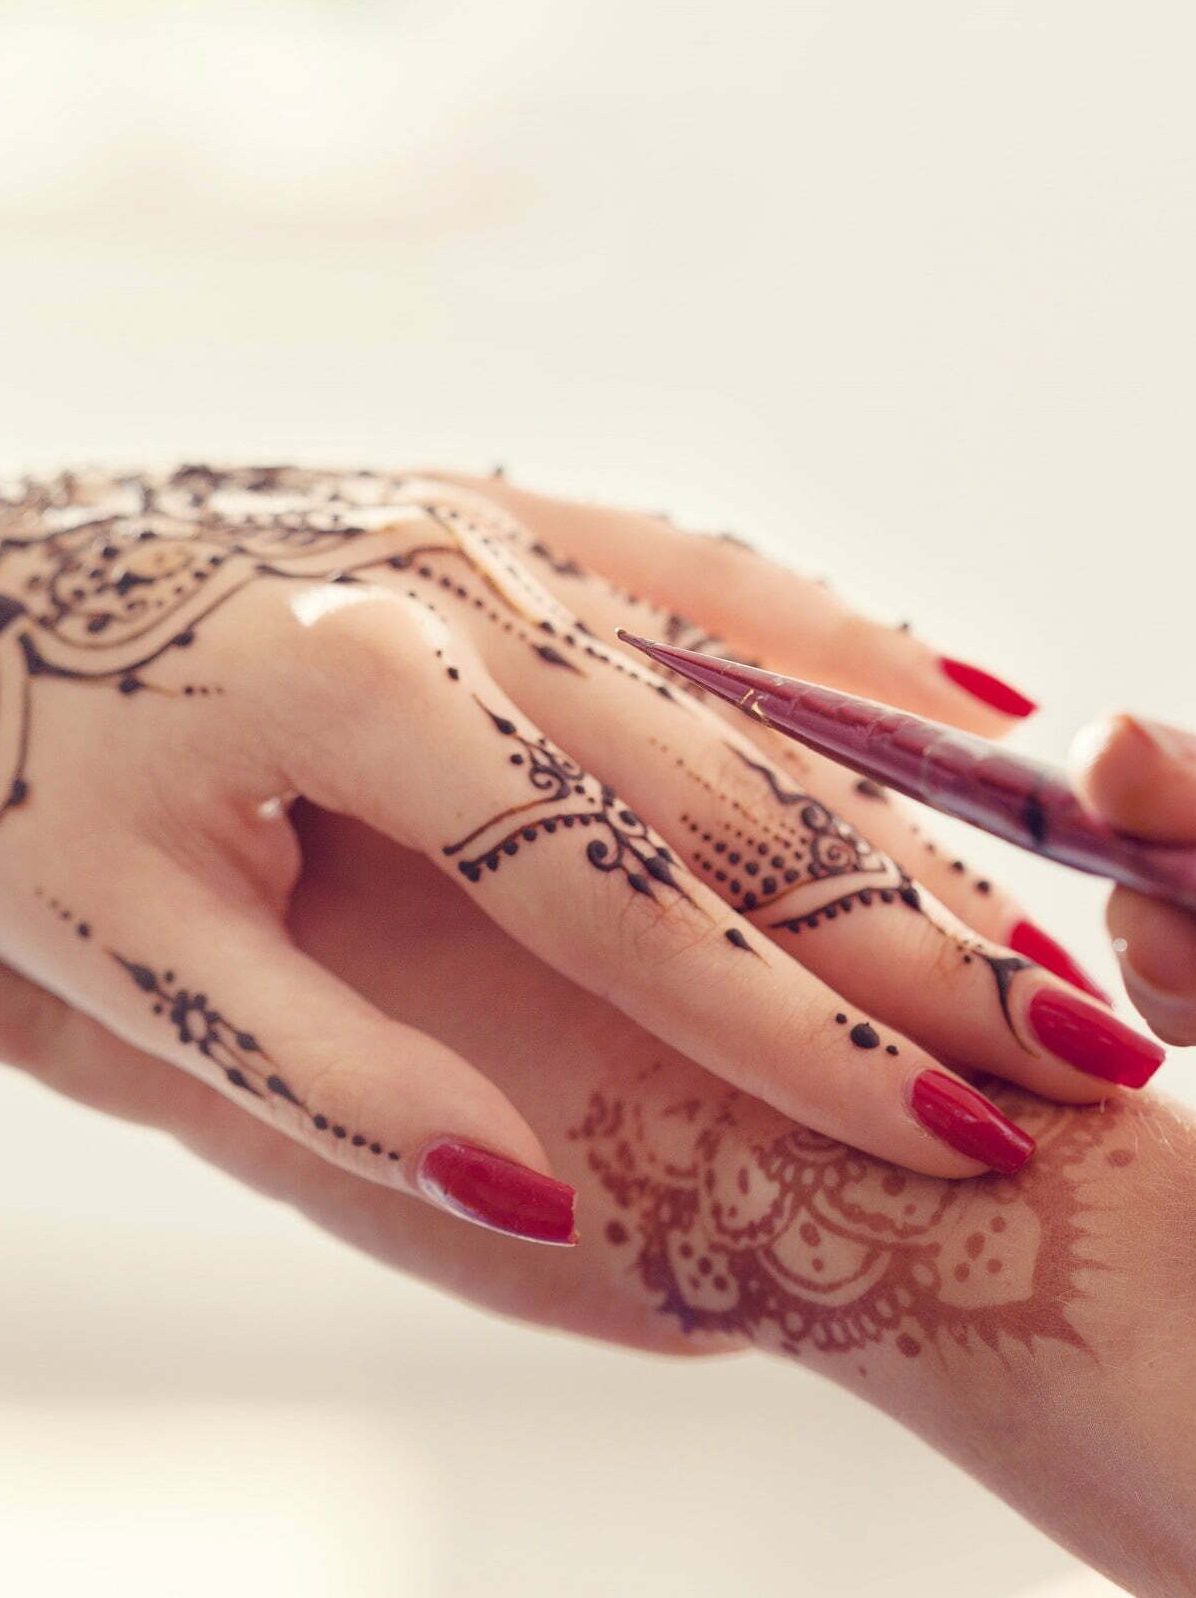 Can water fade henna